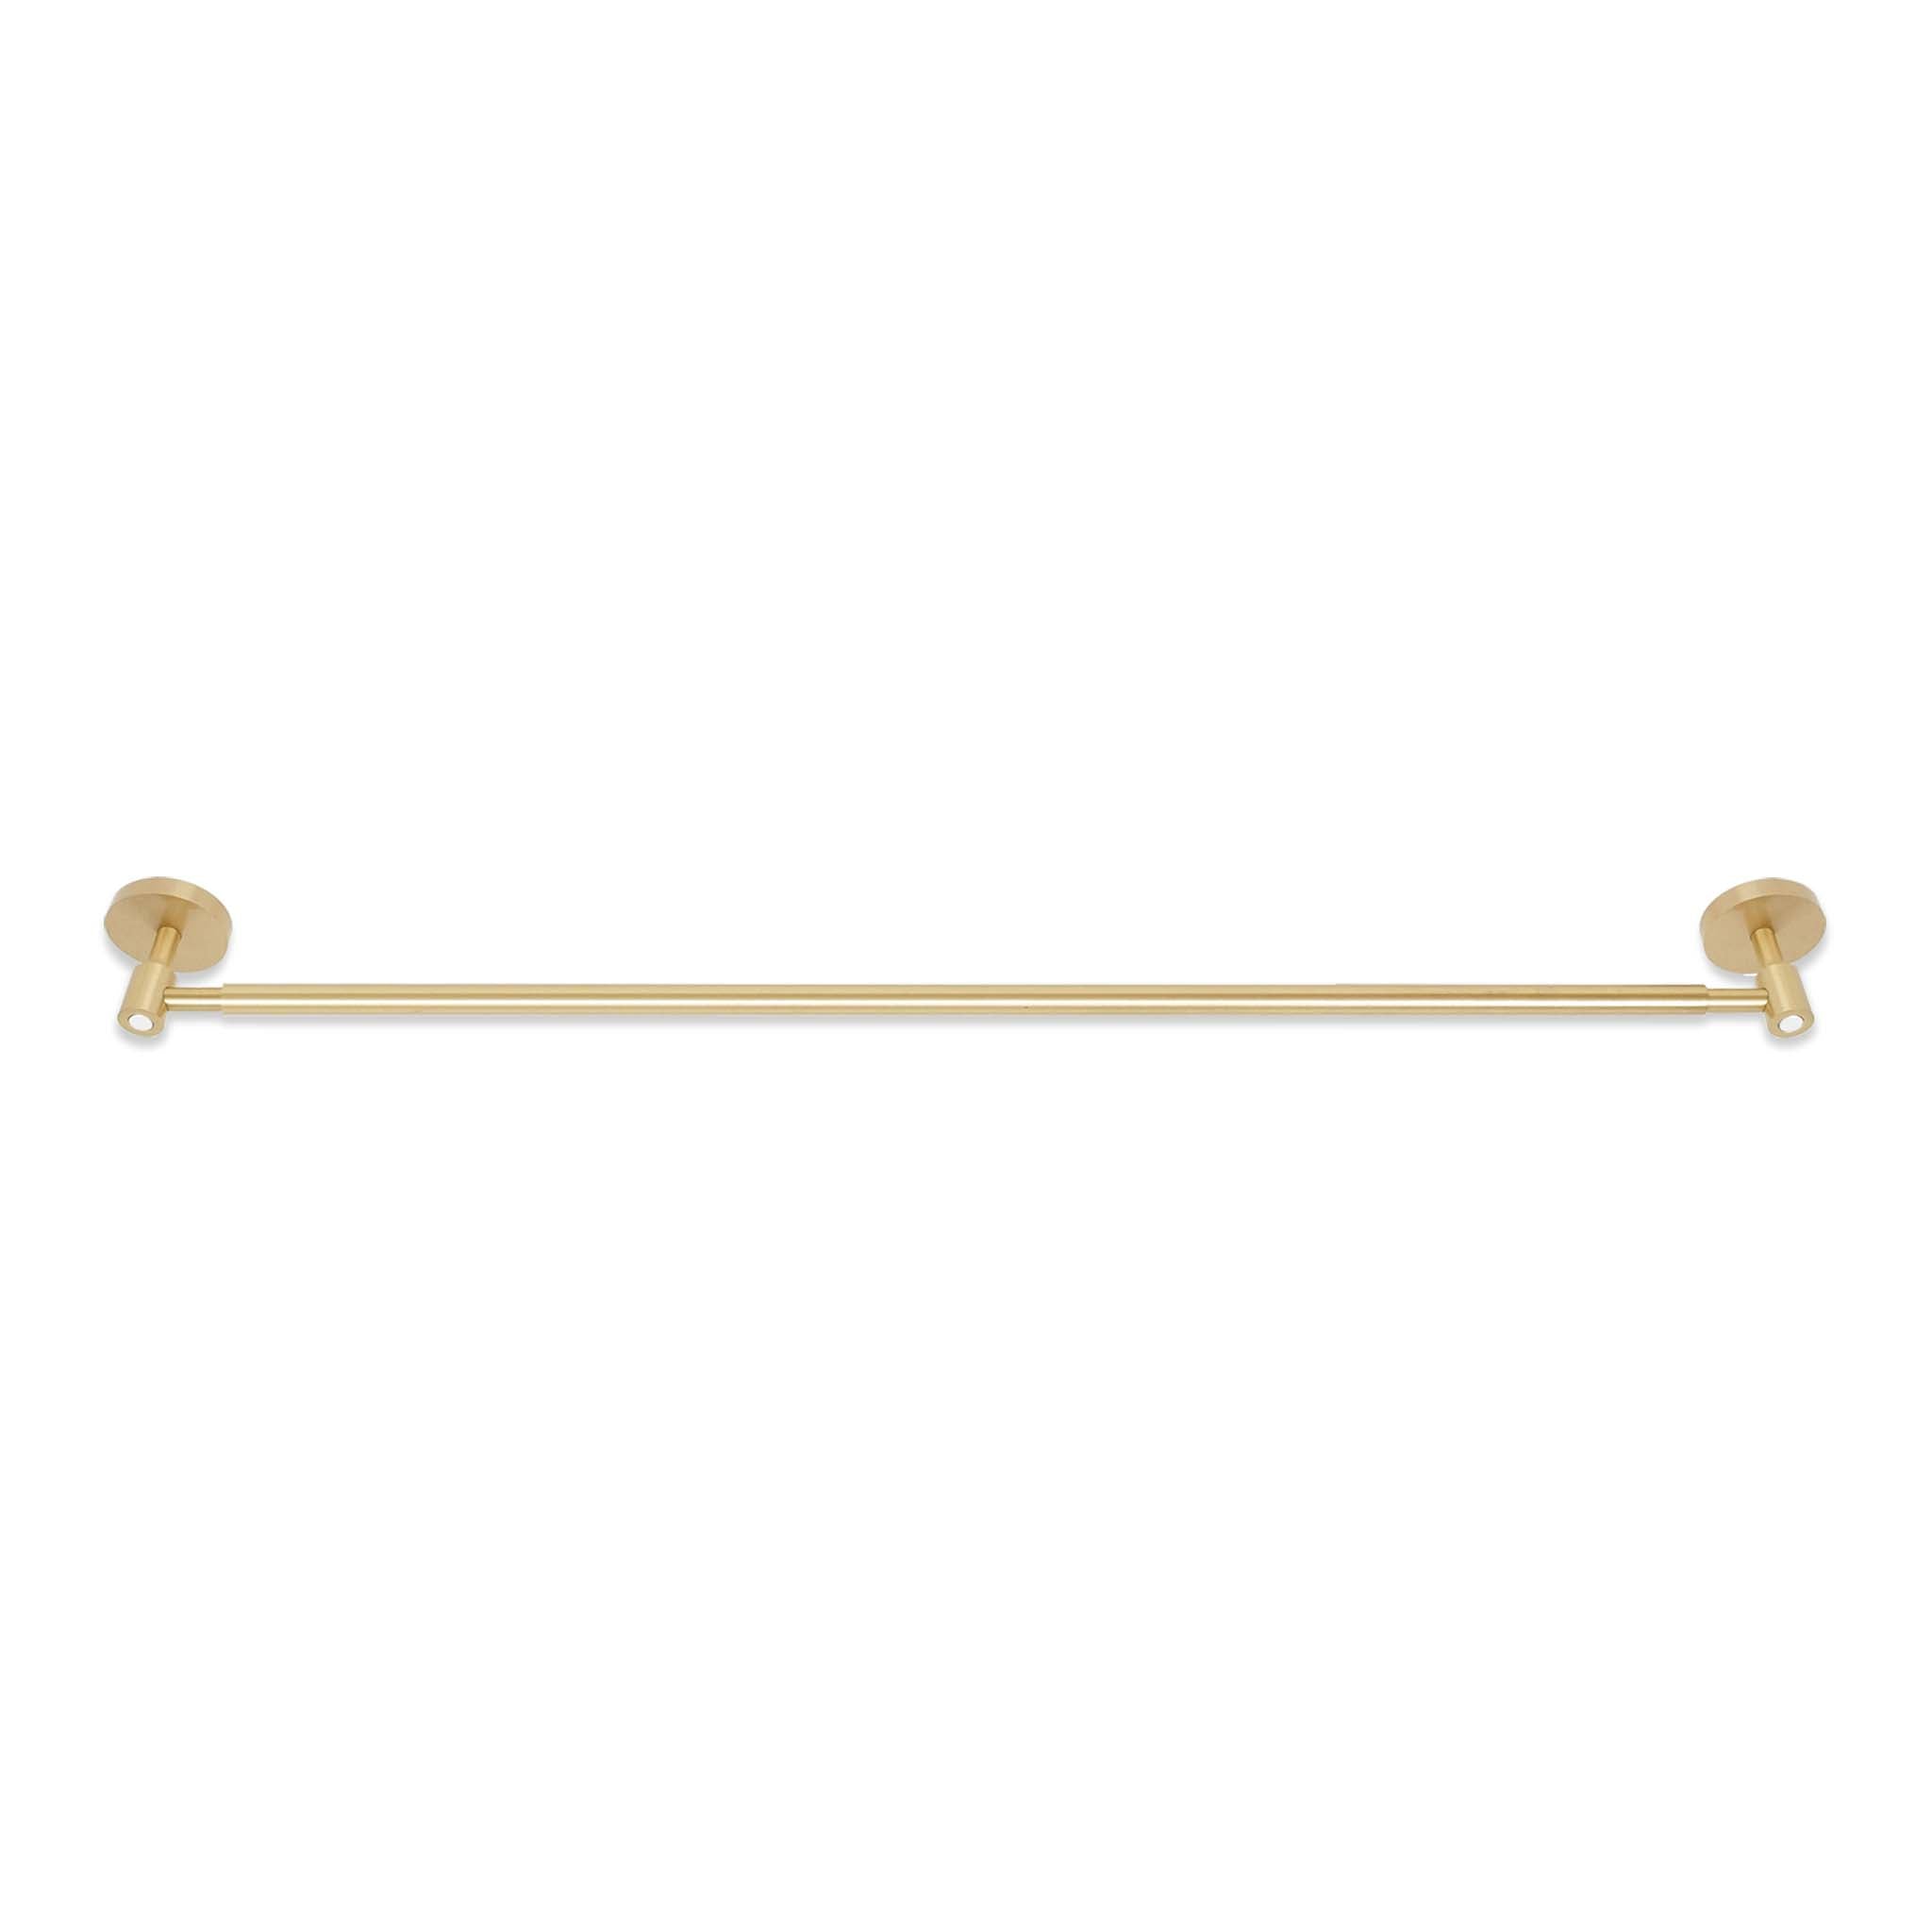 Brass and white color Head towel bar 24" Dutton Brown hardware